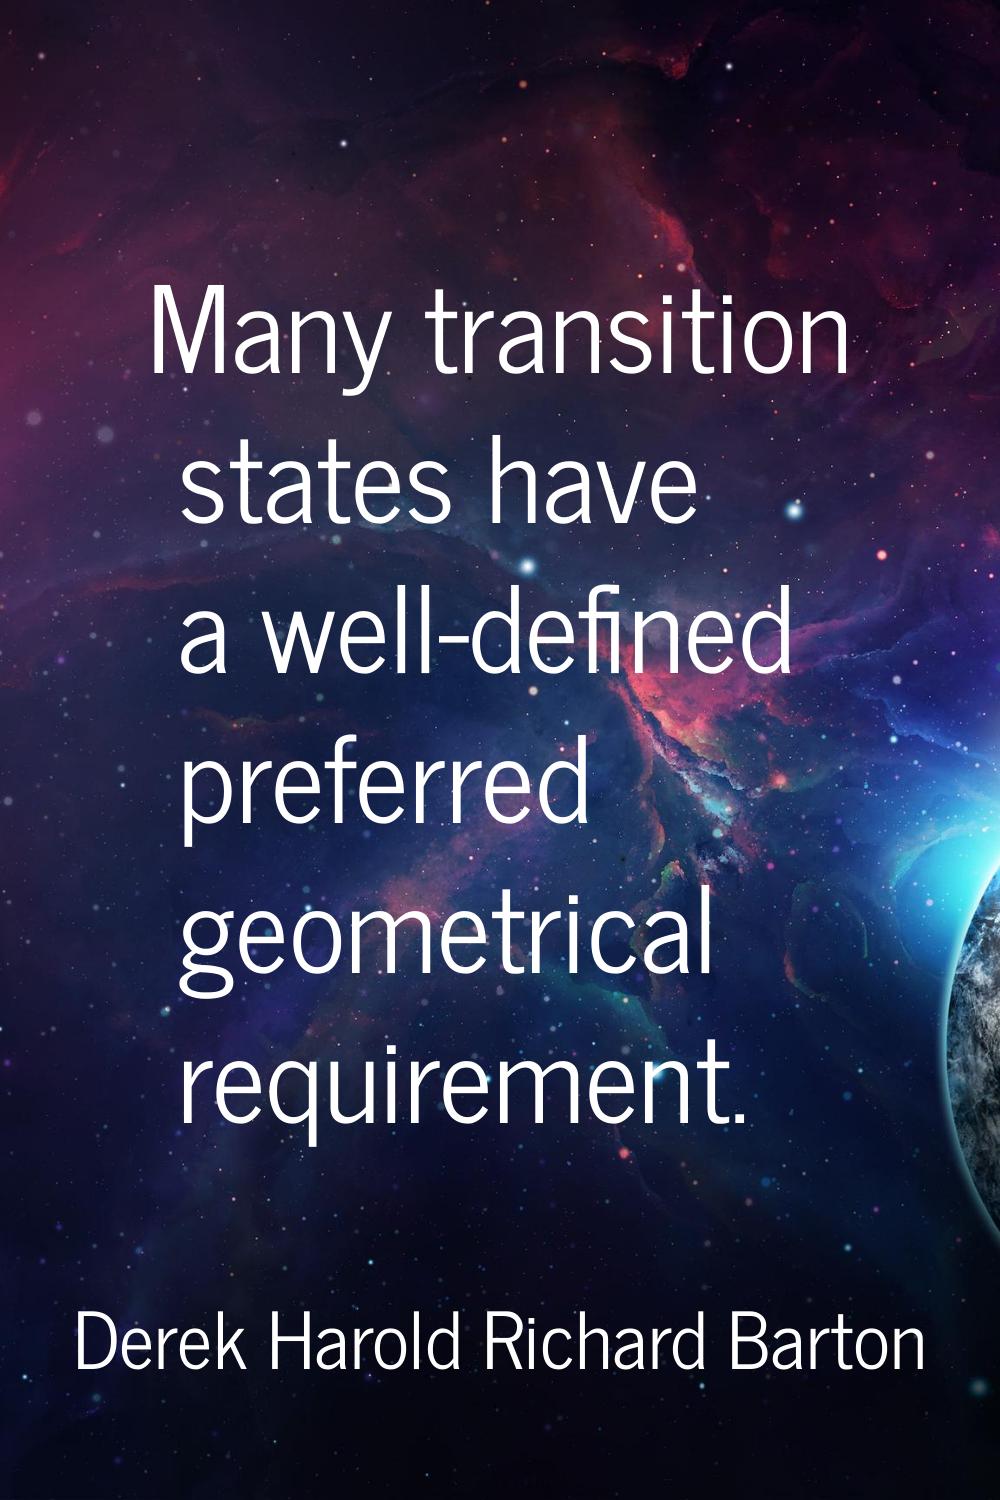 Many transition states have a well-defined preferred geometrical requirement.